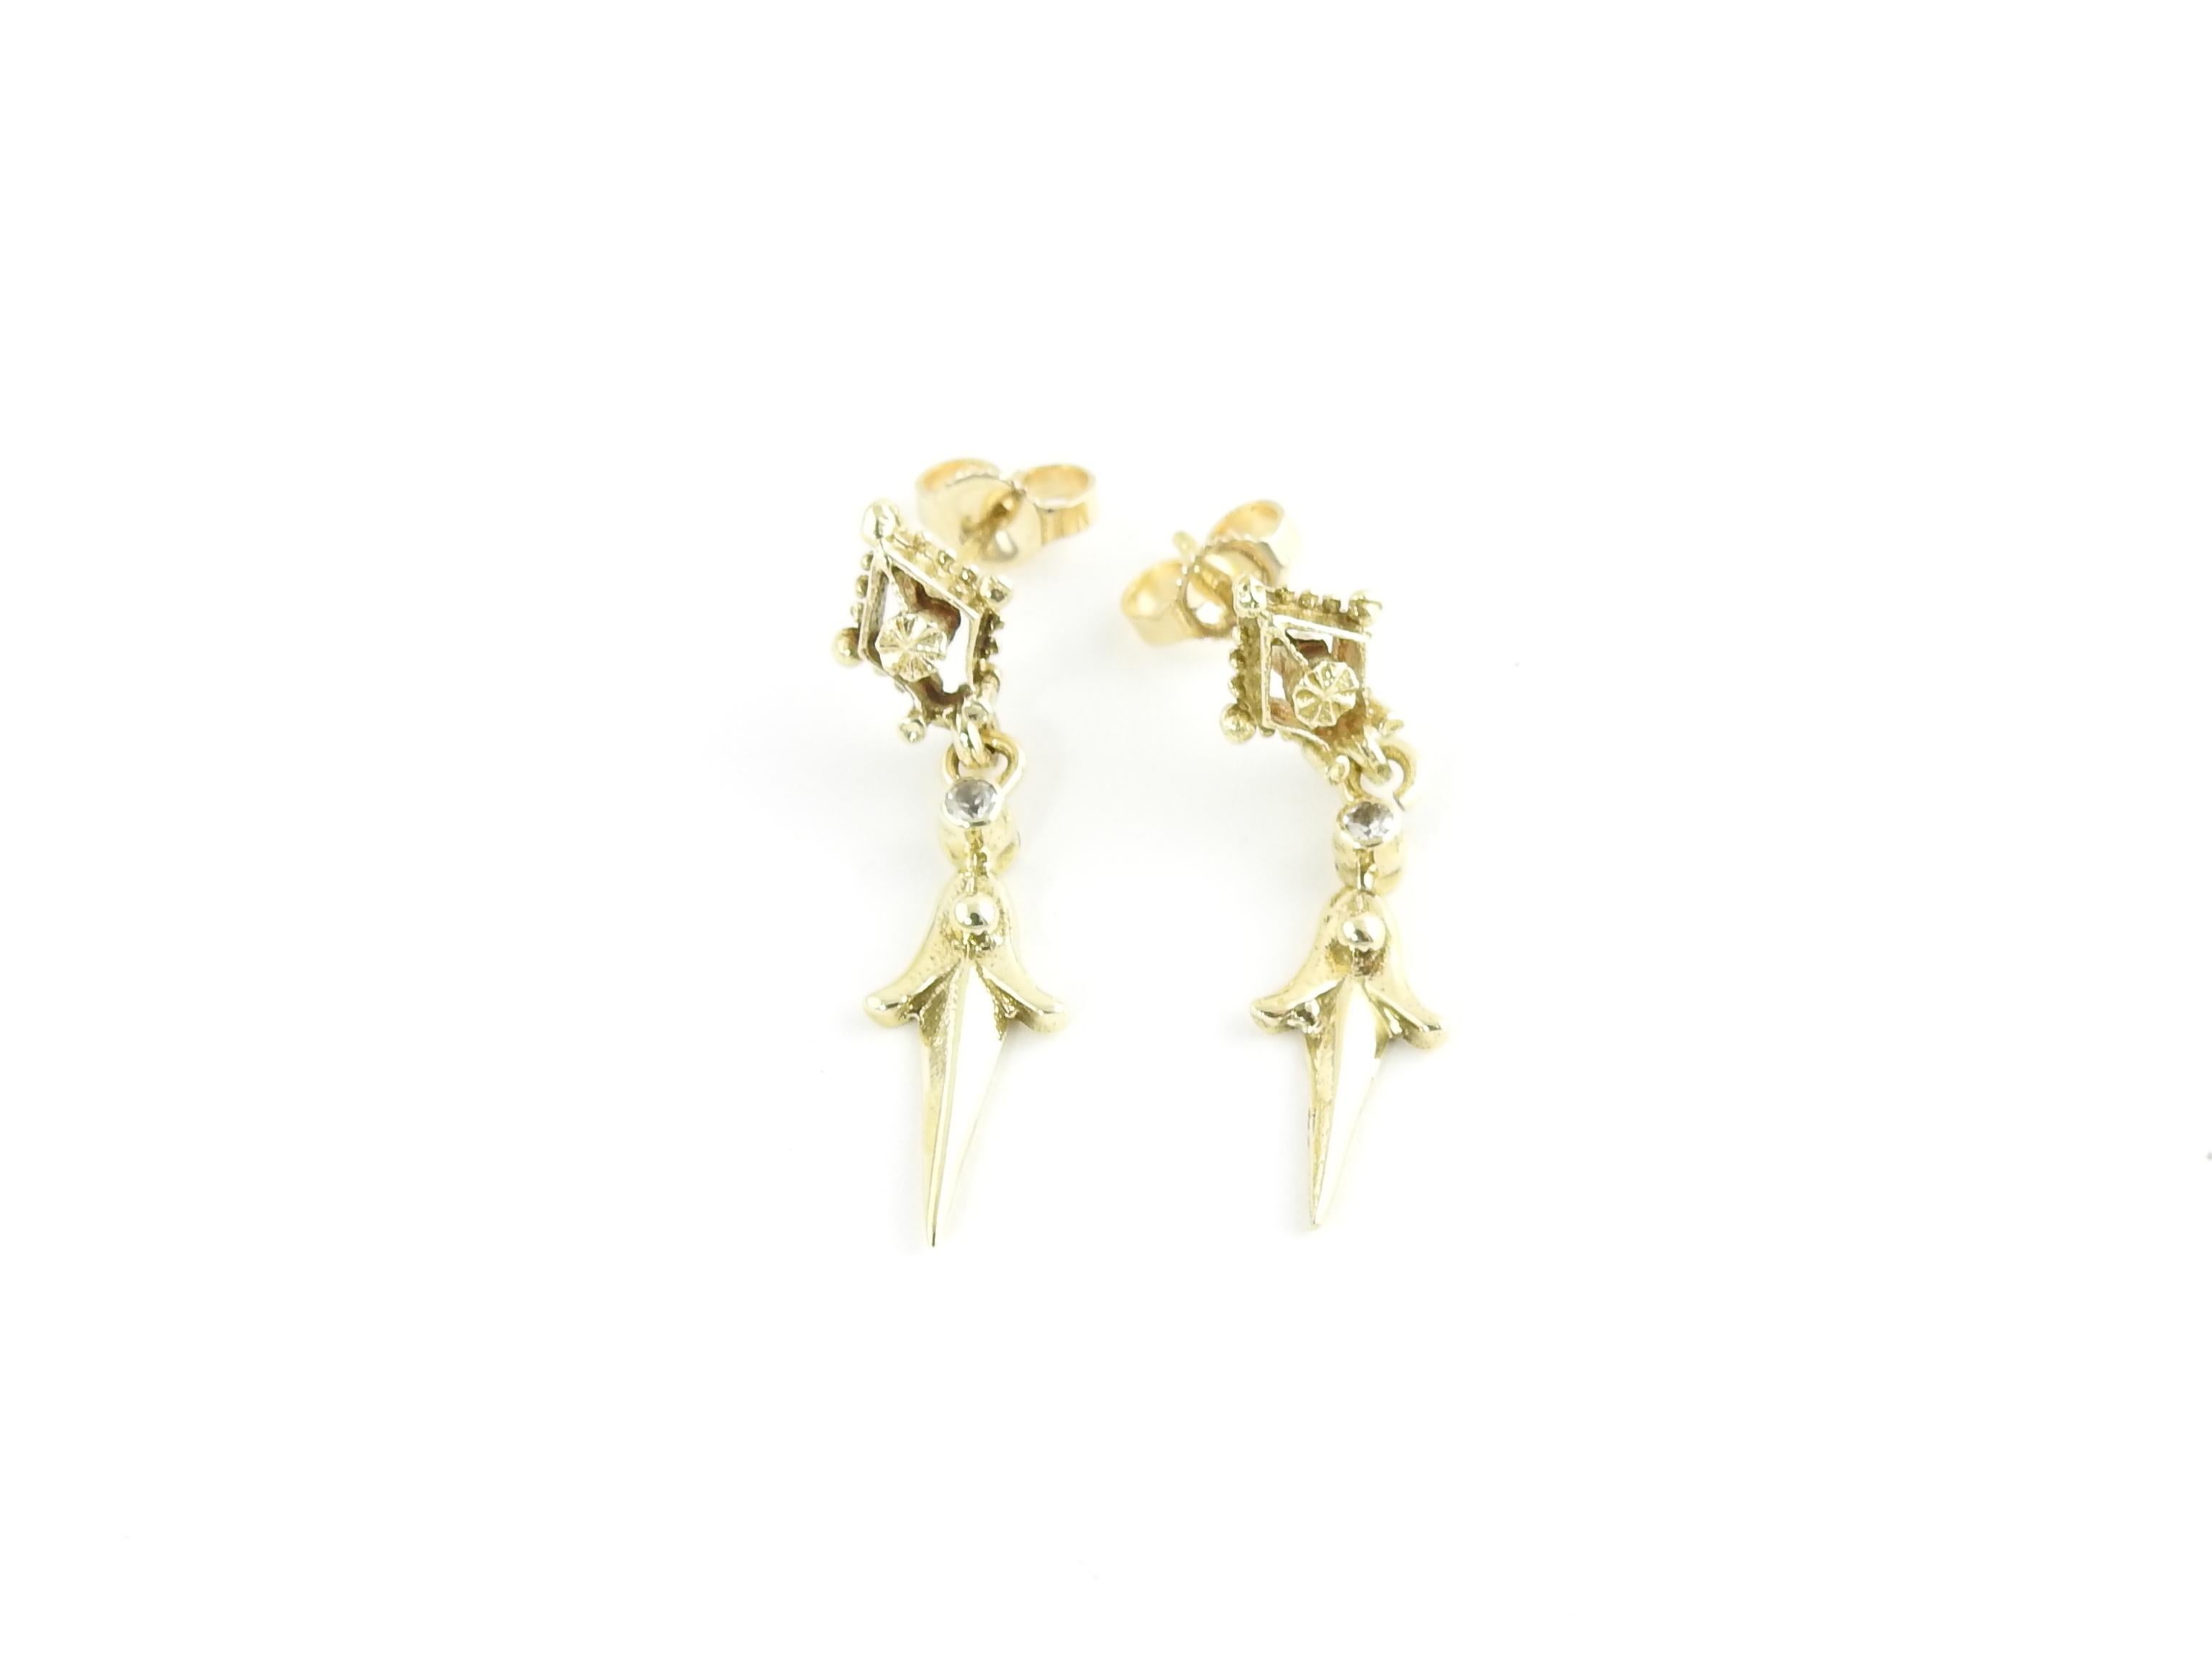 Vintage 14 Karat Yellow Gold Drop Earrings

These lovely dangling earrings are crafted in beautifully detailed 14K yellow gold. Push back closures.

*Matching pendant: #5917

Size: 27 mm x 7 mm

Weight: 1.8 dwt. / 2.9 gr.

Stamped: 14K

Very good